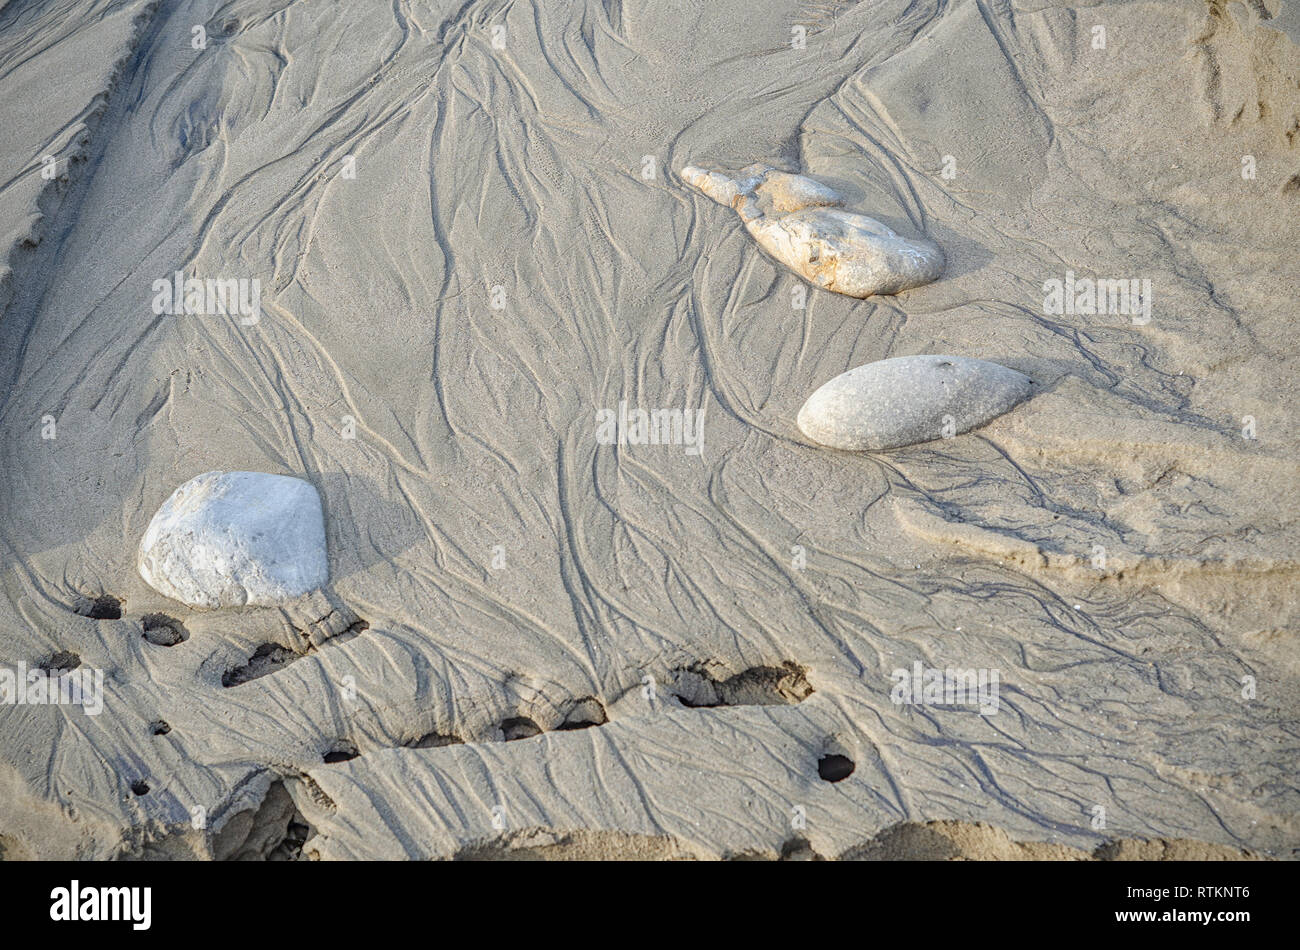 Rocks on the sandy beach are revealed as the tide recedes, Refugio State Beach, Goleta, CA. Stock Photo